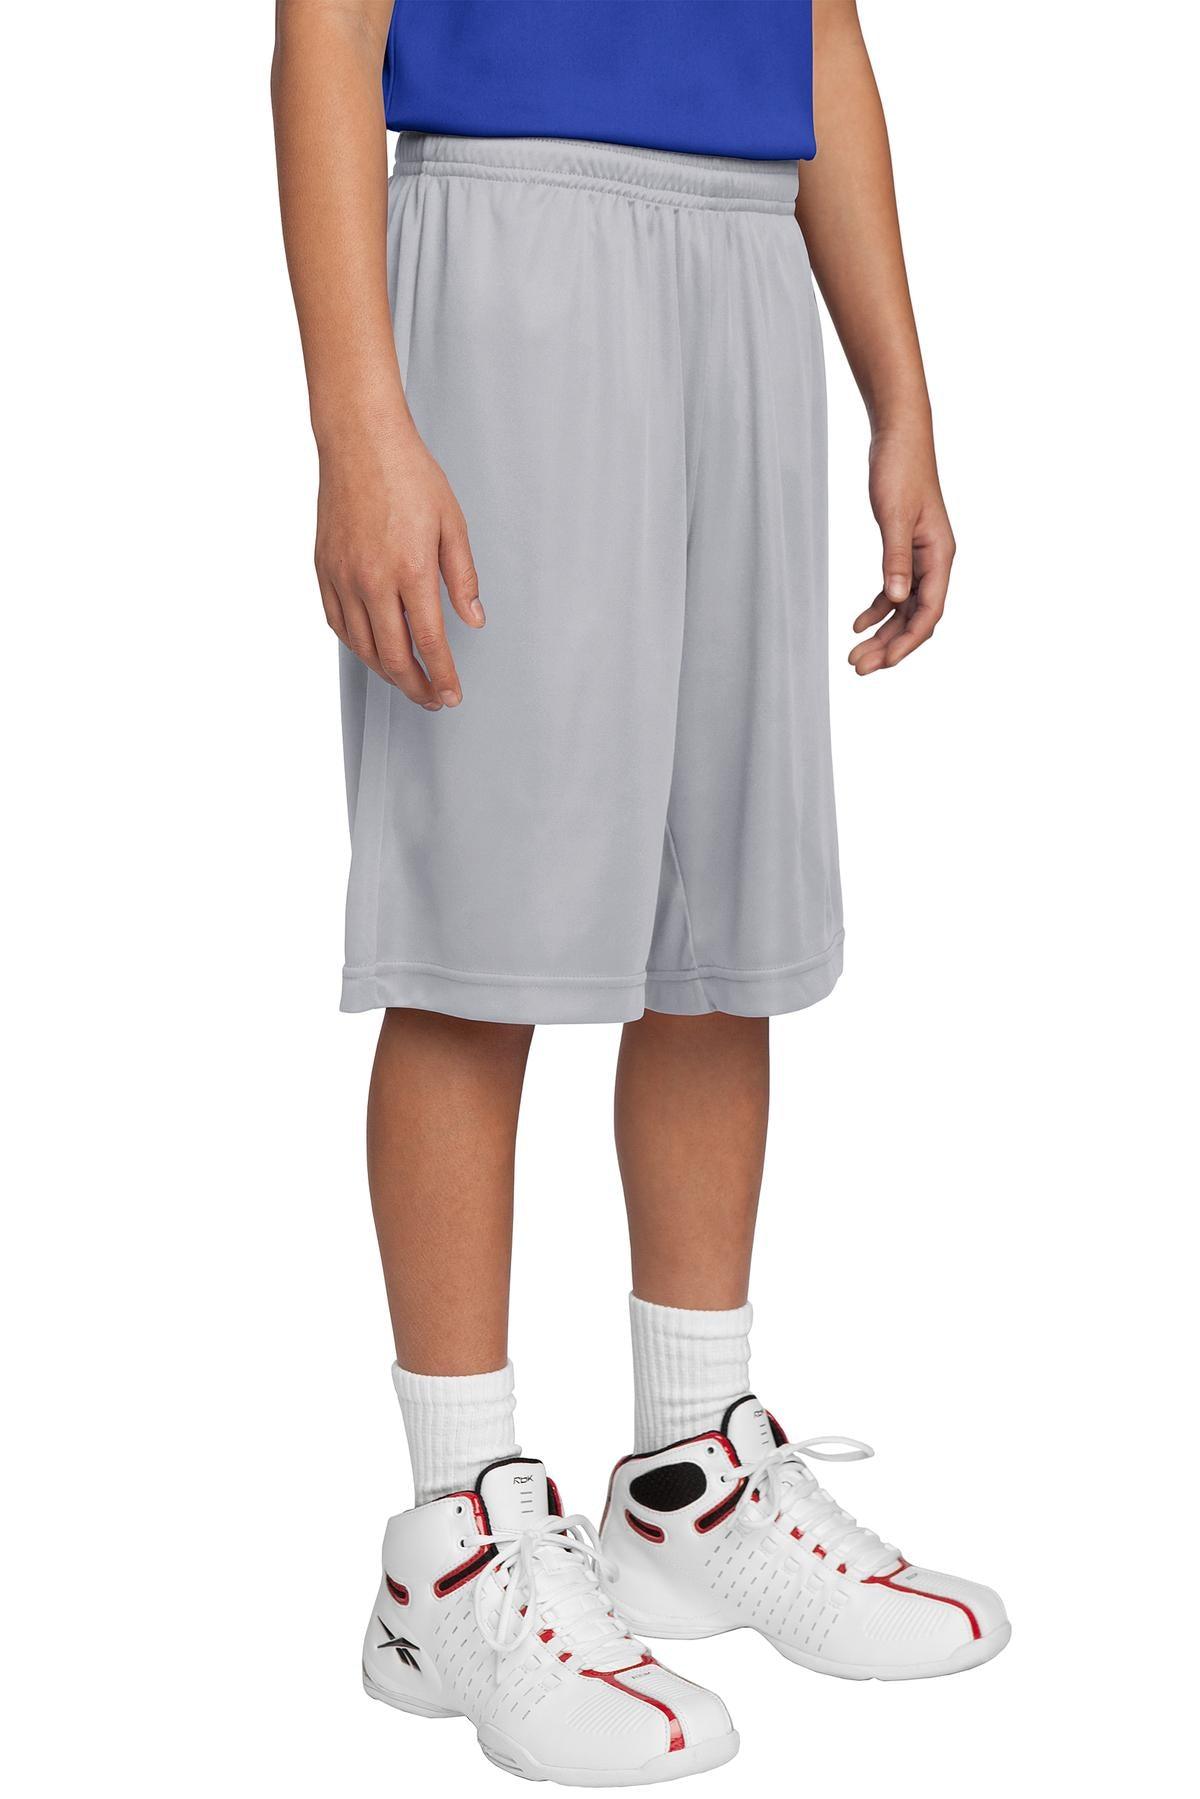 Sport-Tek Youth PosiCharge Competitor Short. YST355 - Dresses Max